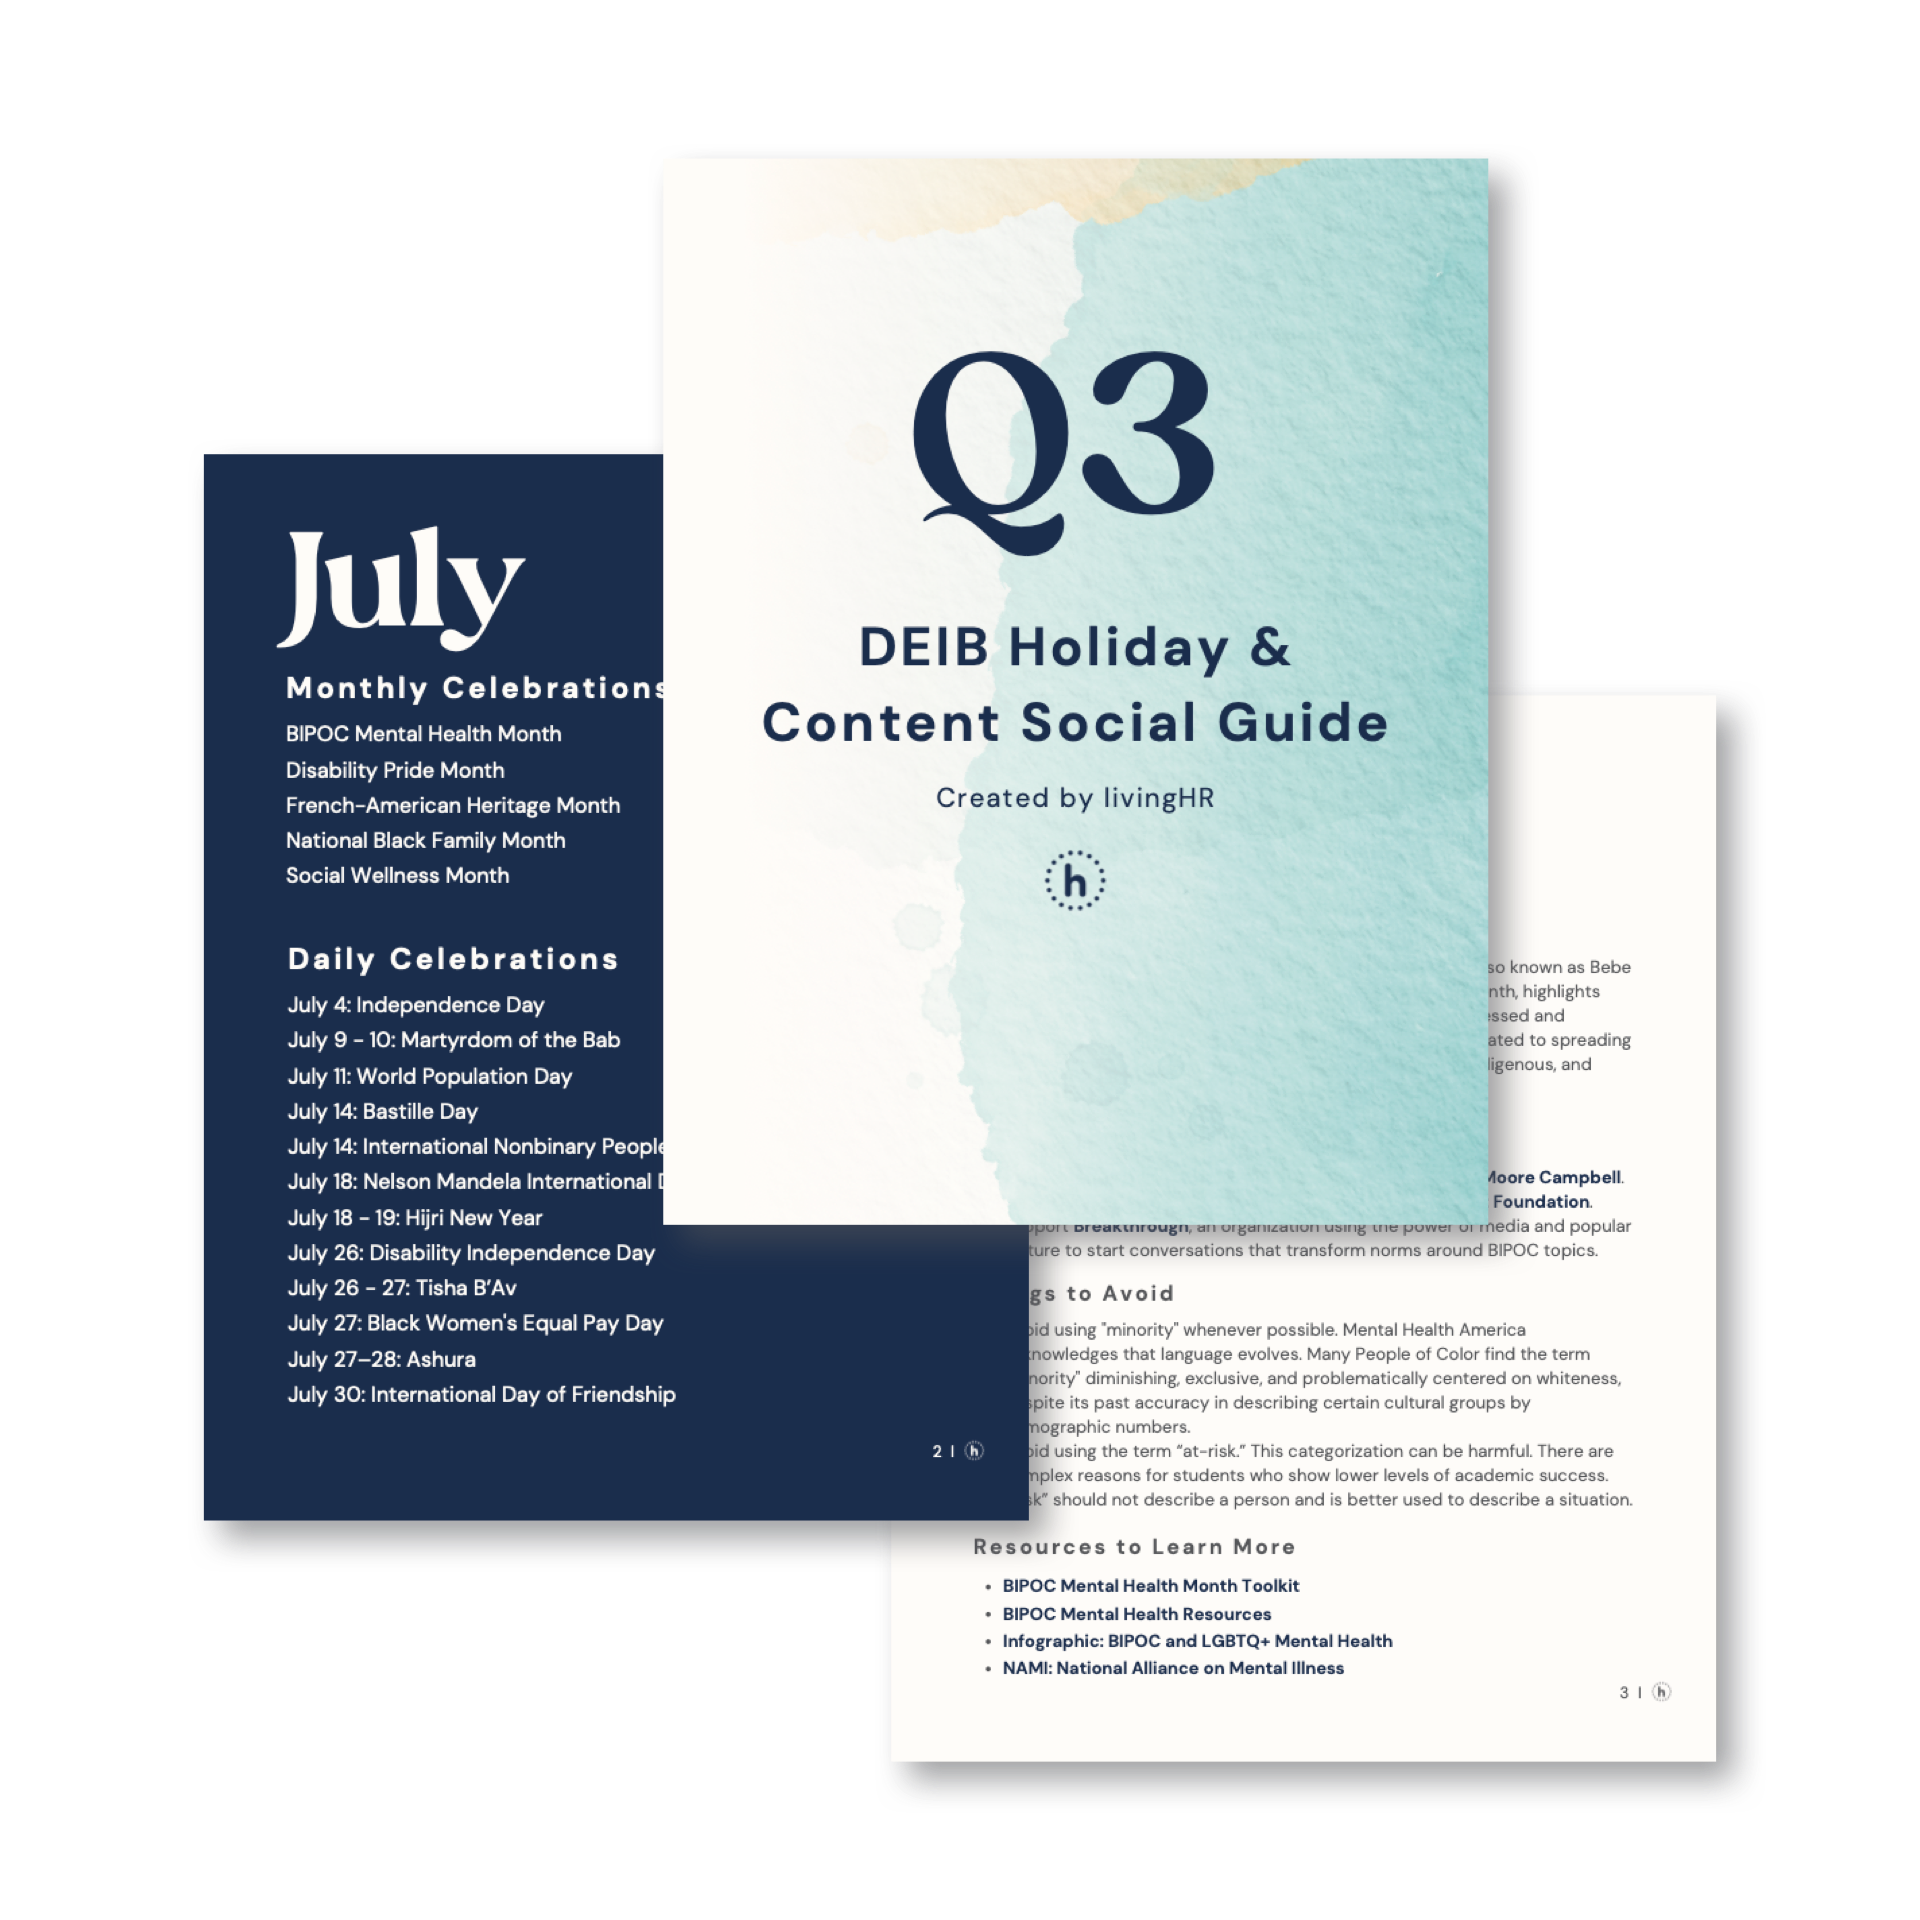 ‎Q3 DEIB Holiday & Content Social Guide Preview.‎001